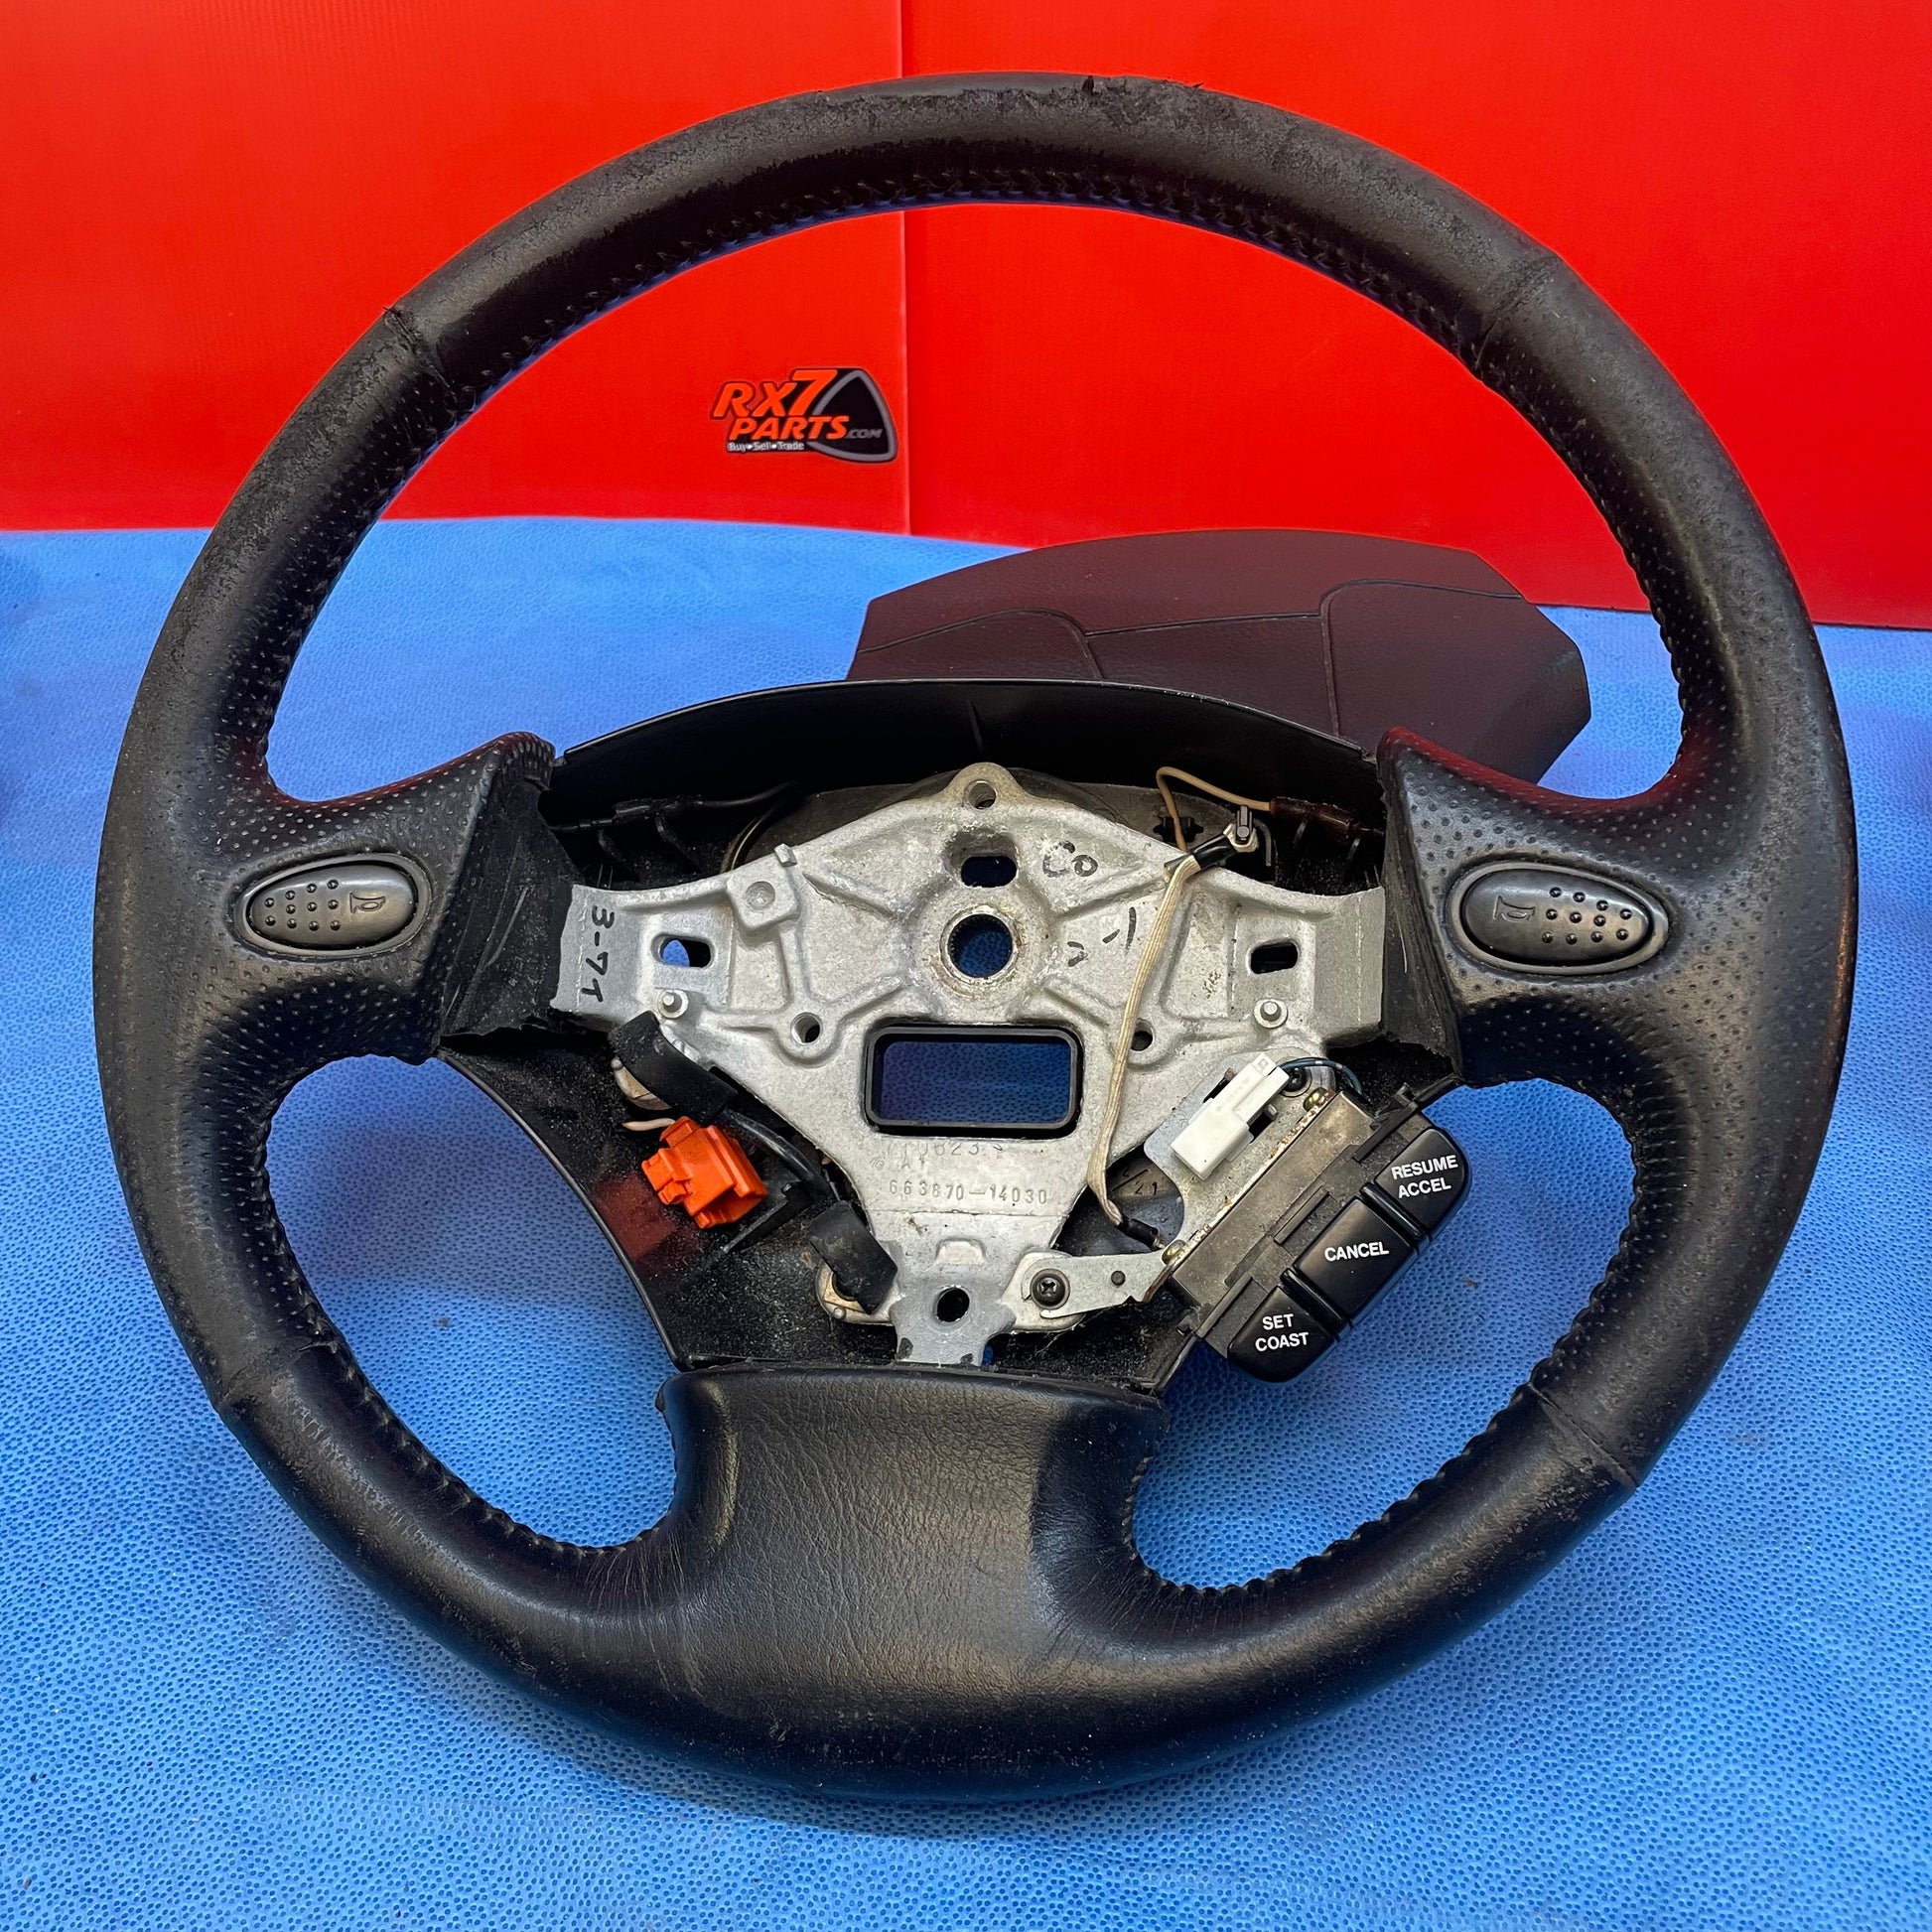 LHD OEM Steering Wheel Complete w/ Cruise Control Buttons  Mazda Rx7 FD3S FD S4B3ABSW - RX7Parts